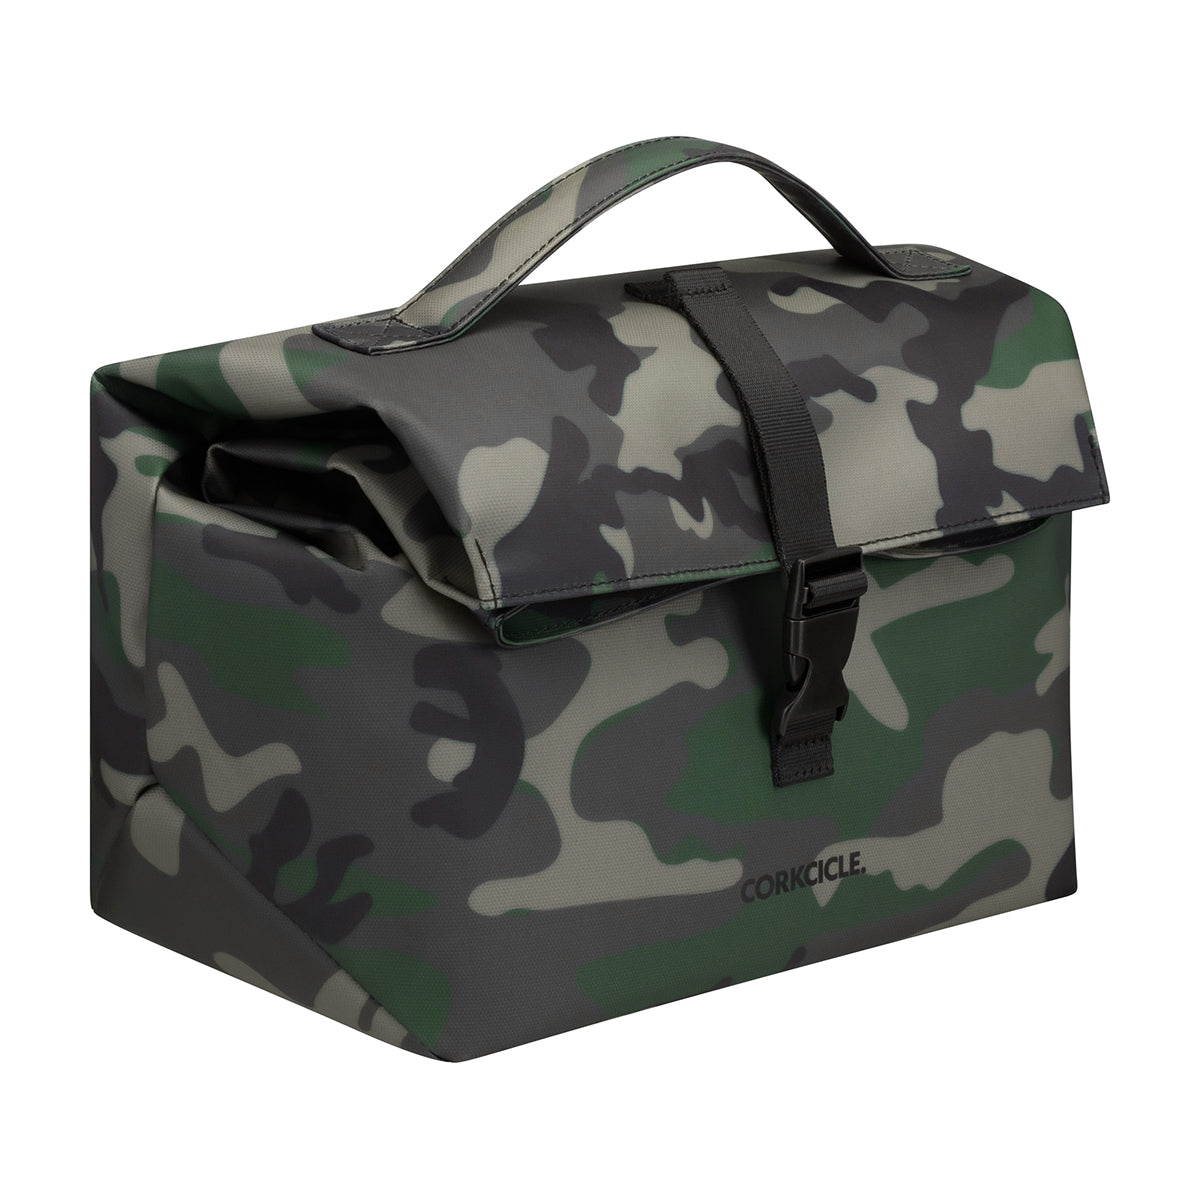 CORKCICLE Cooler Bag Nona Roll-Top - Woodland Camo Lunch Bag